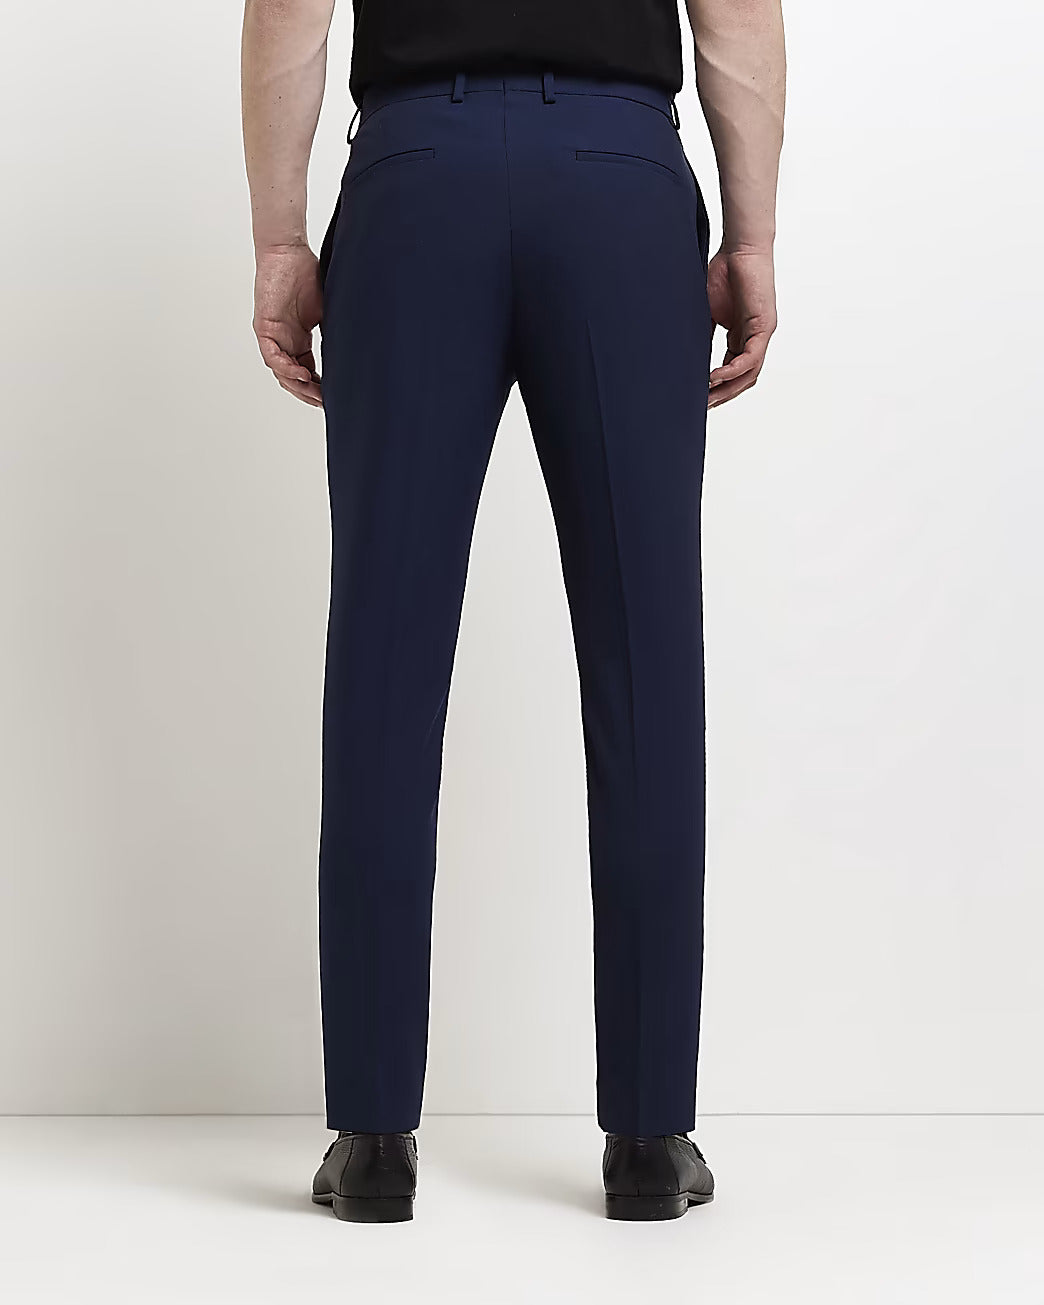 New Look super skinny suit trousers in light blue - suit 1 | £12.50 | Closer